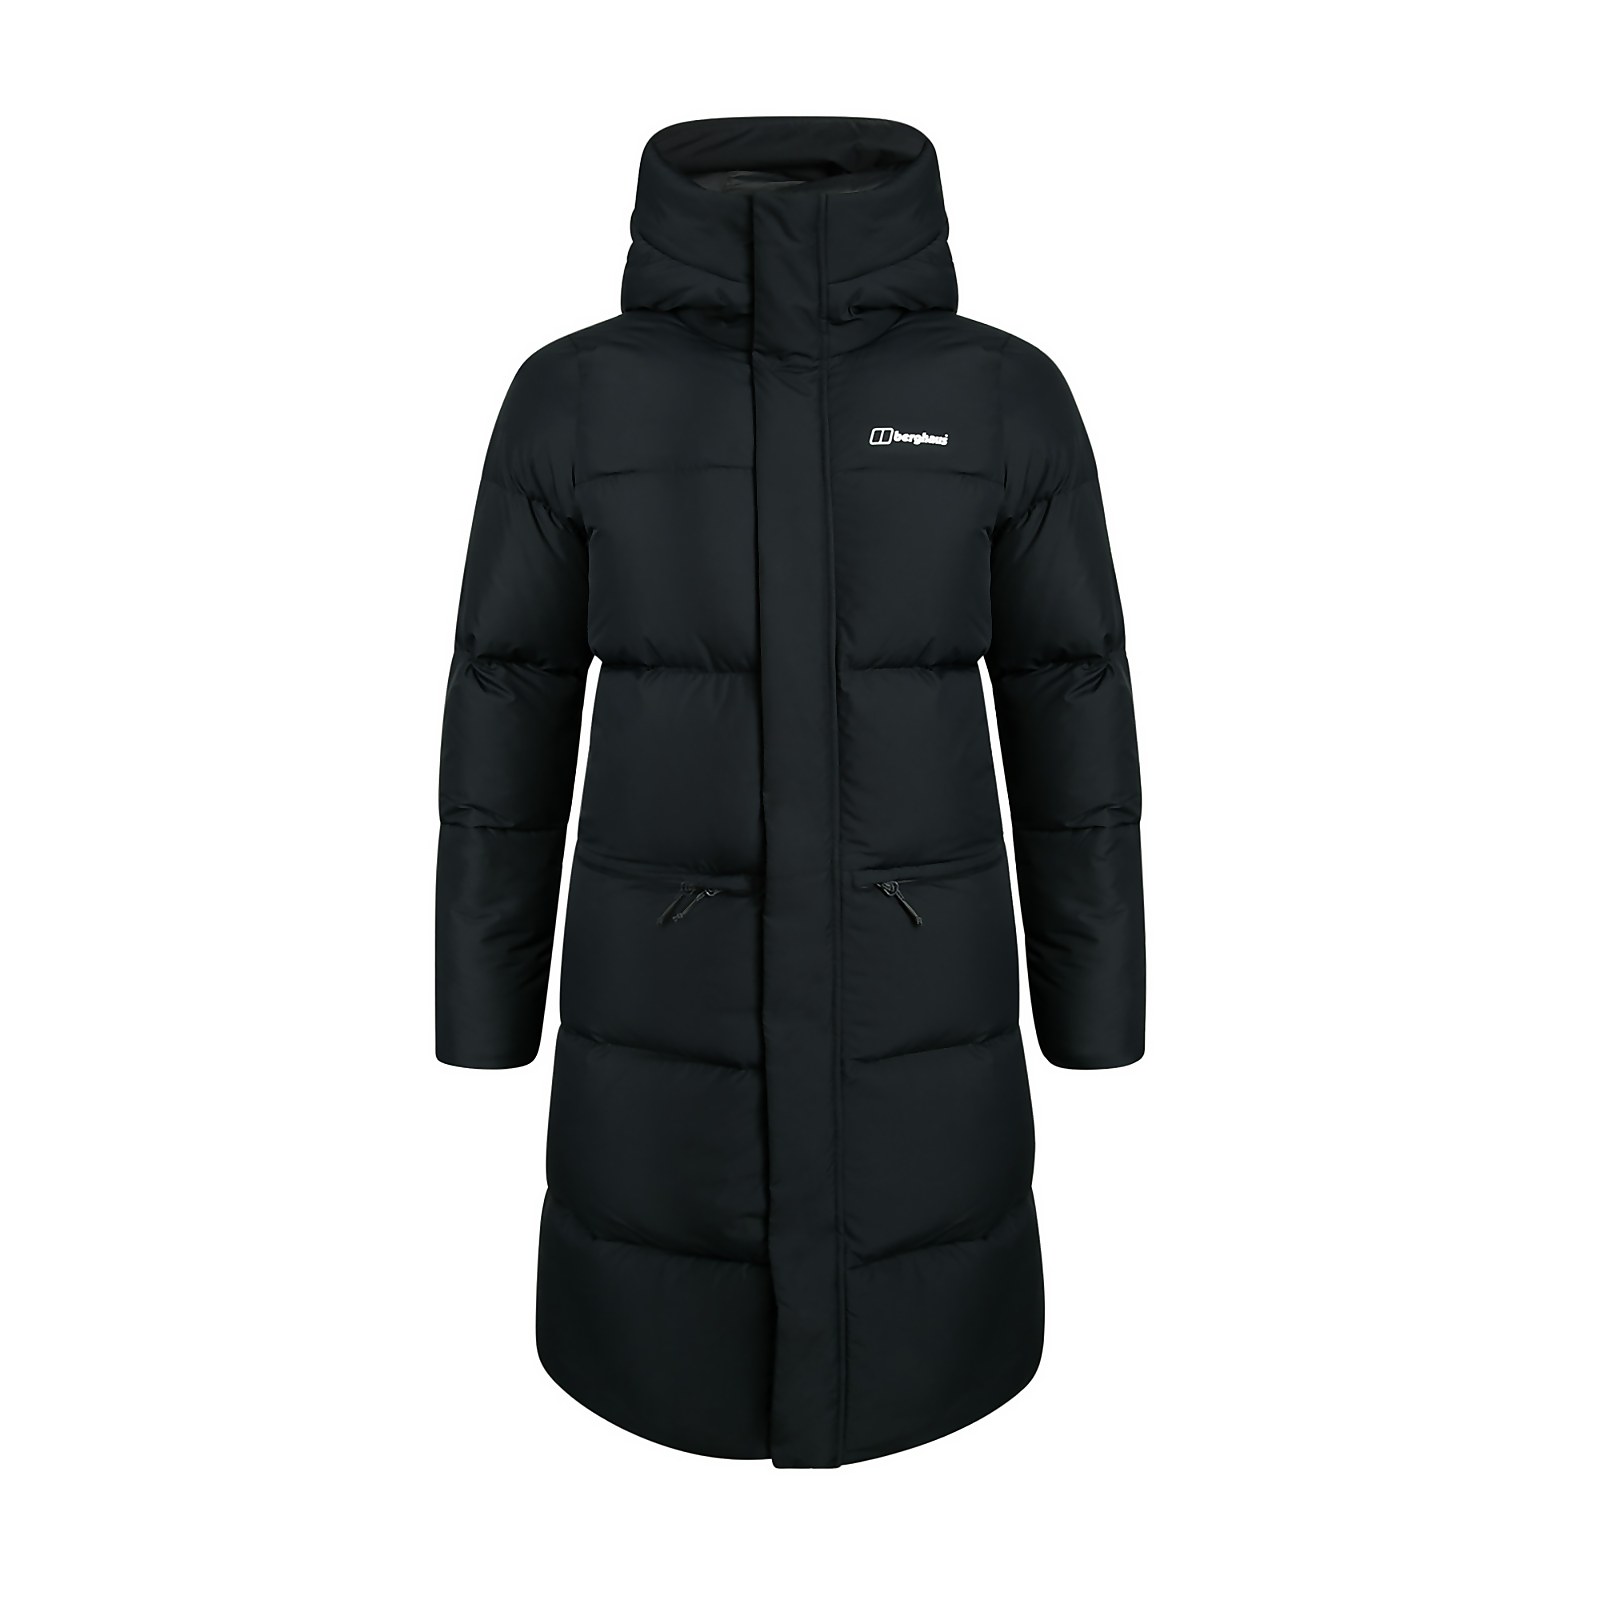 Berghaus Womens Combust Reflect Long Down Insulated Jacket - Black - 12